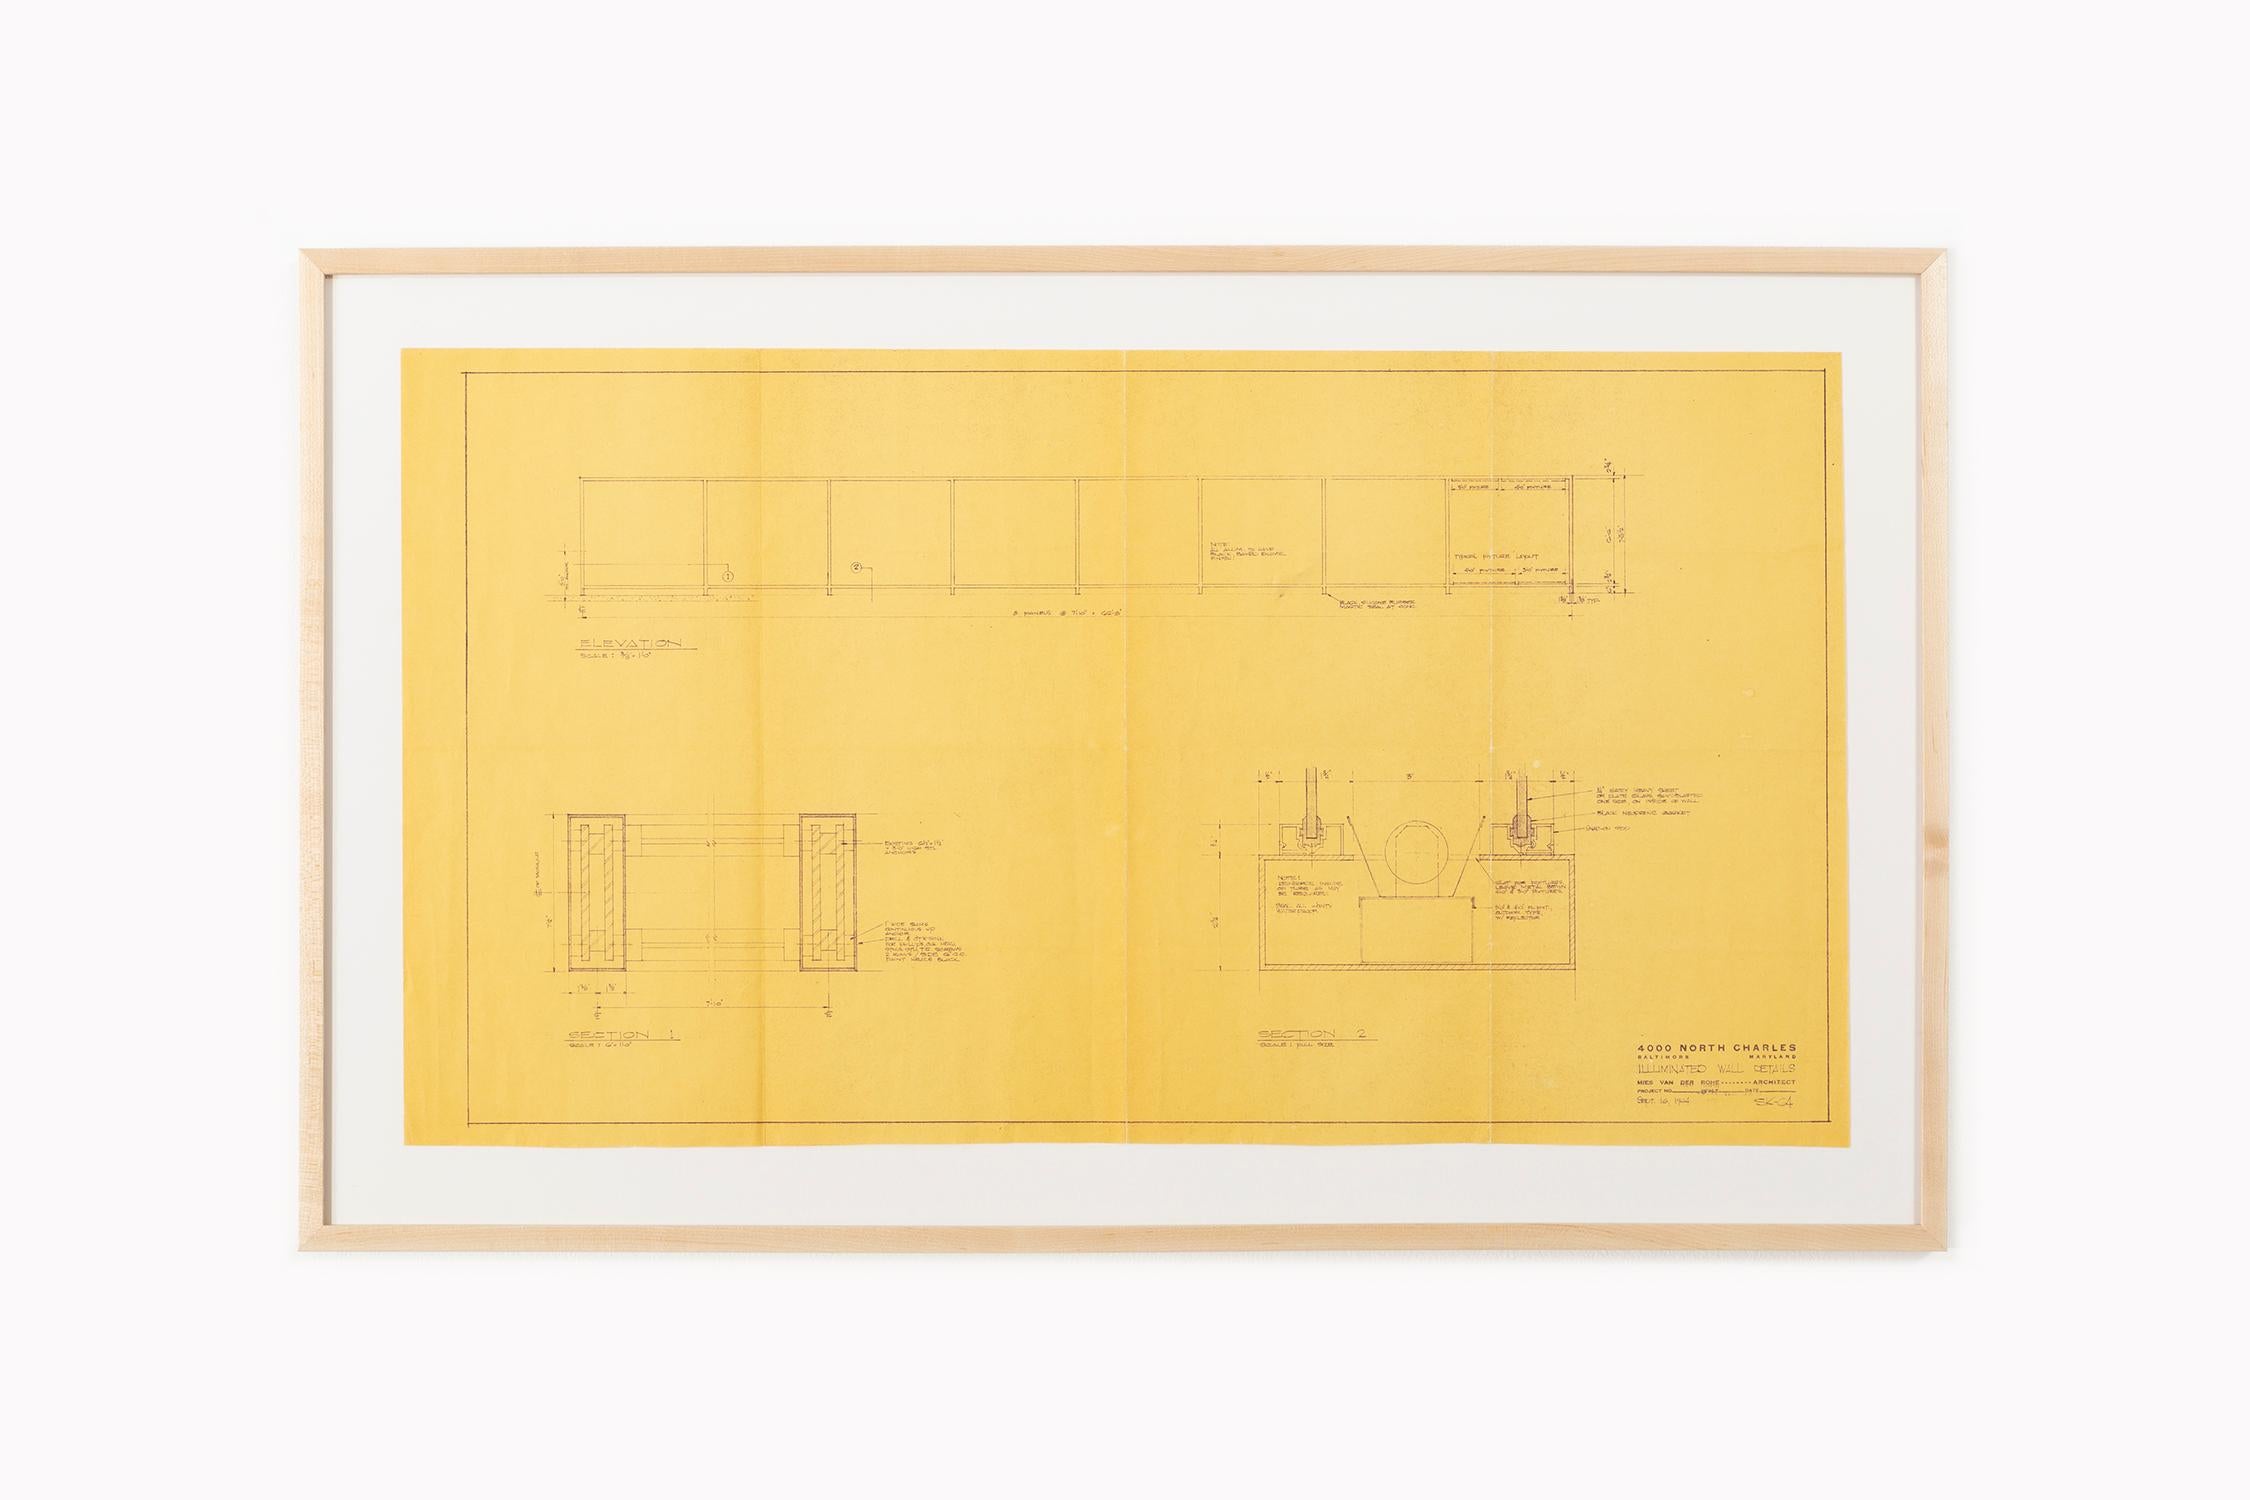 Mies van der Rohe Blueprint, One Charles Center, Baltimore 1961, Elevations  1